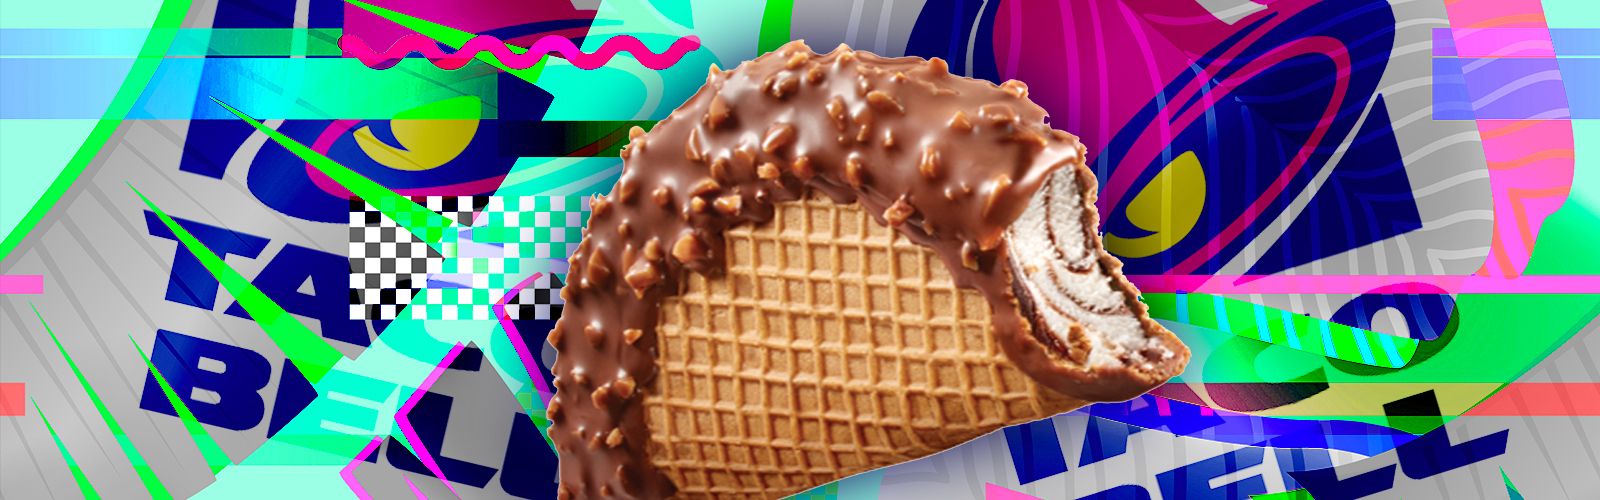 Taco Bell Choco Taco Review